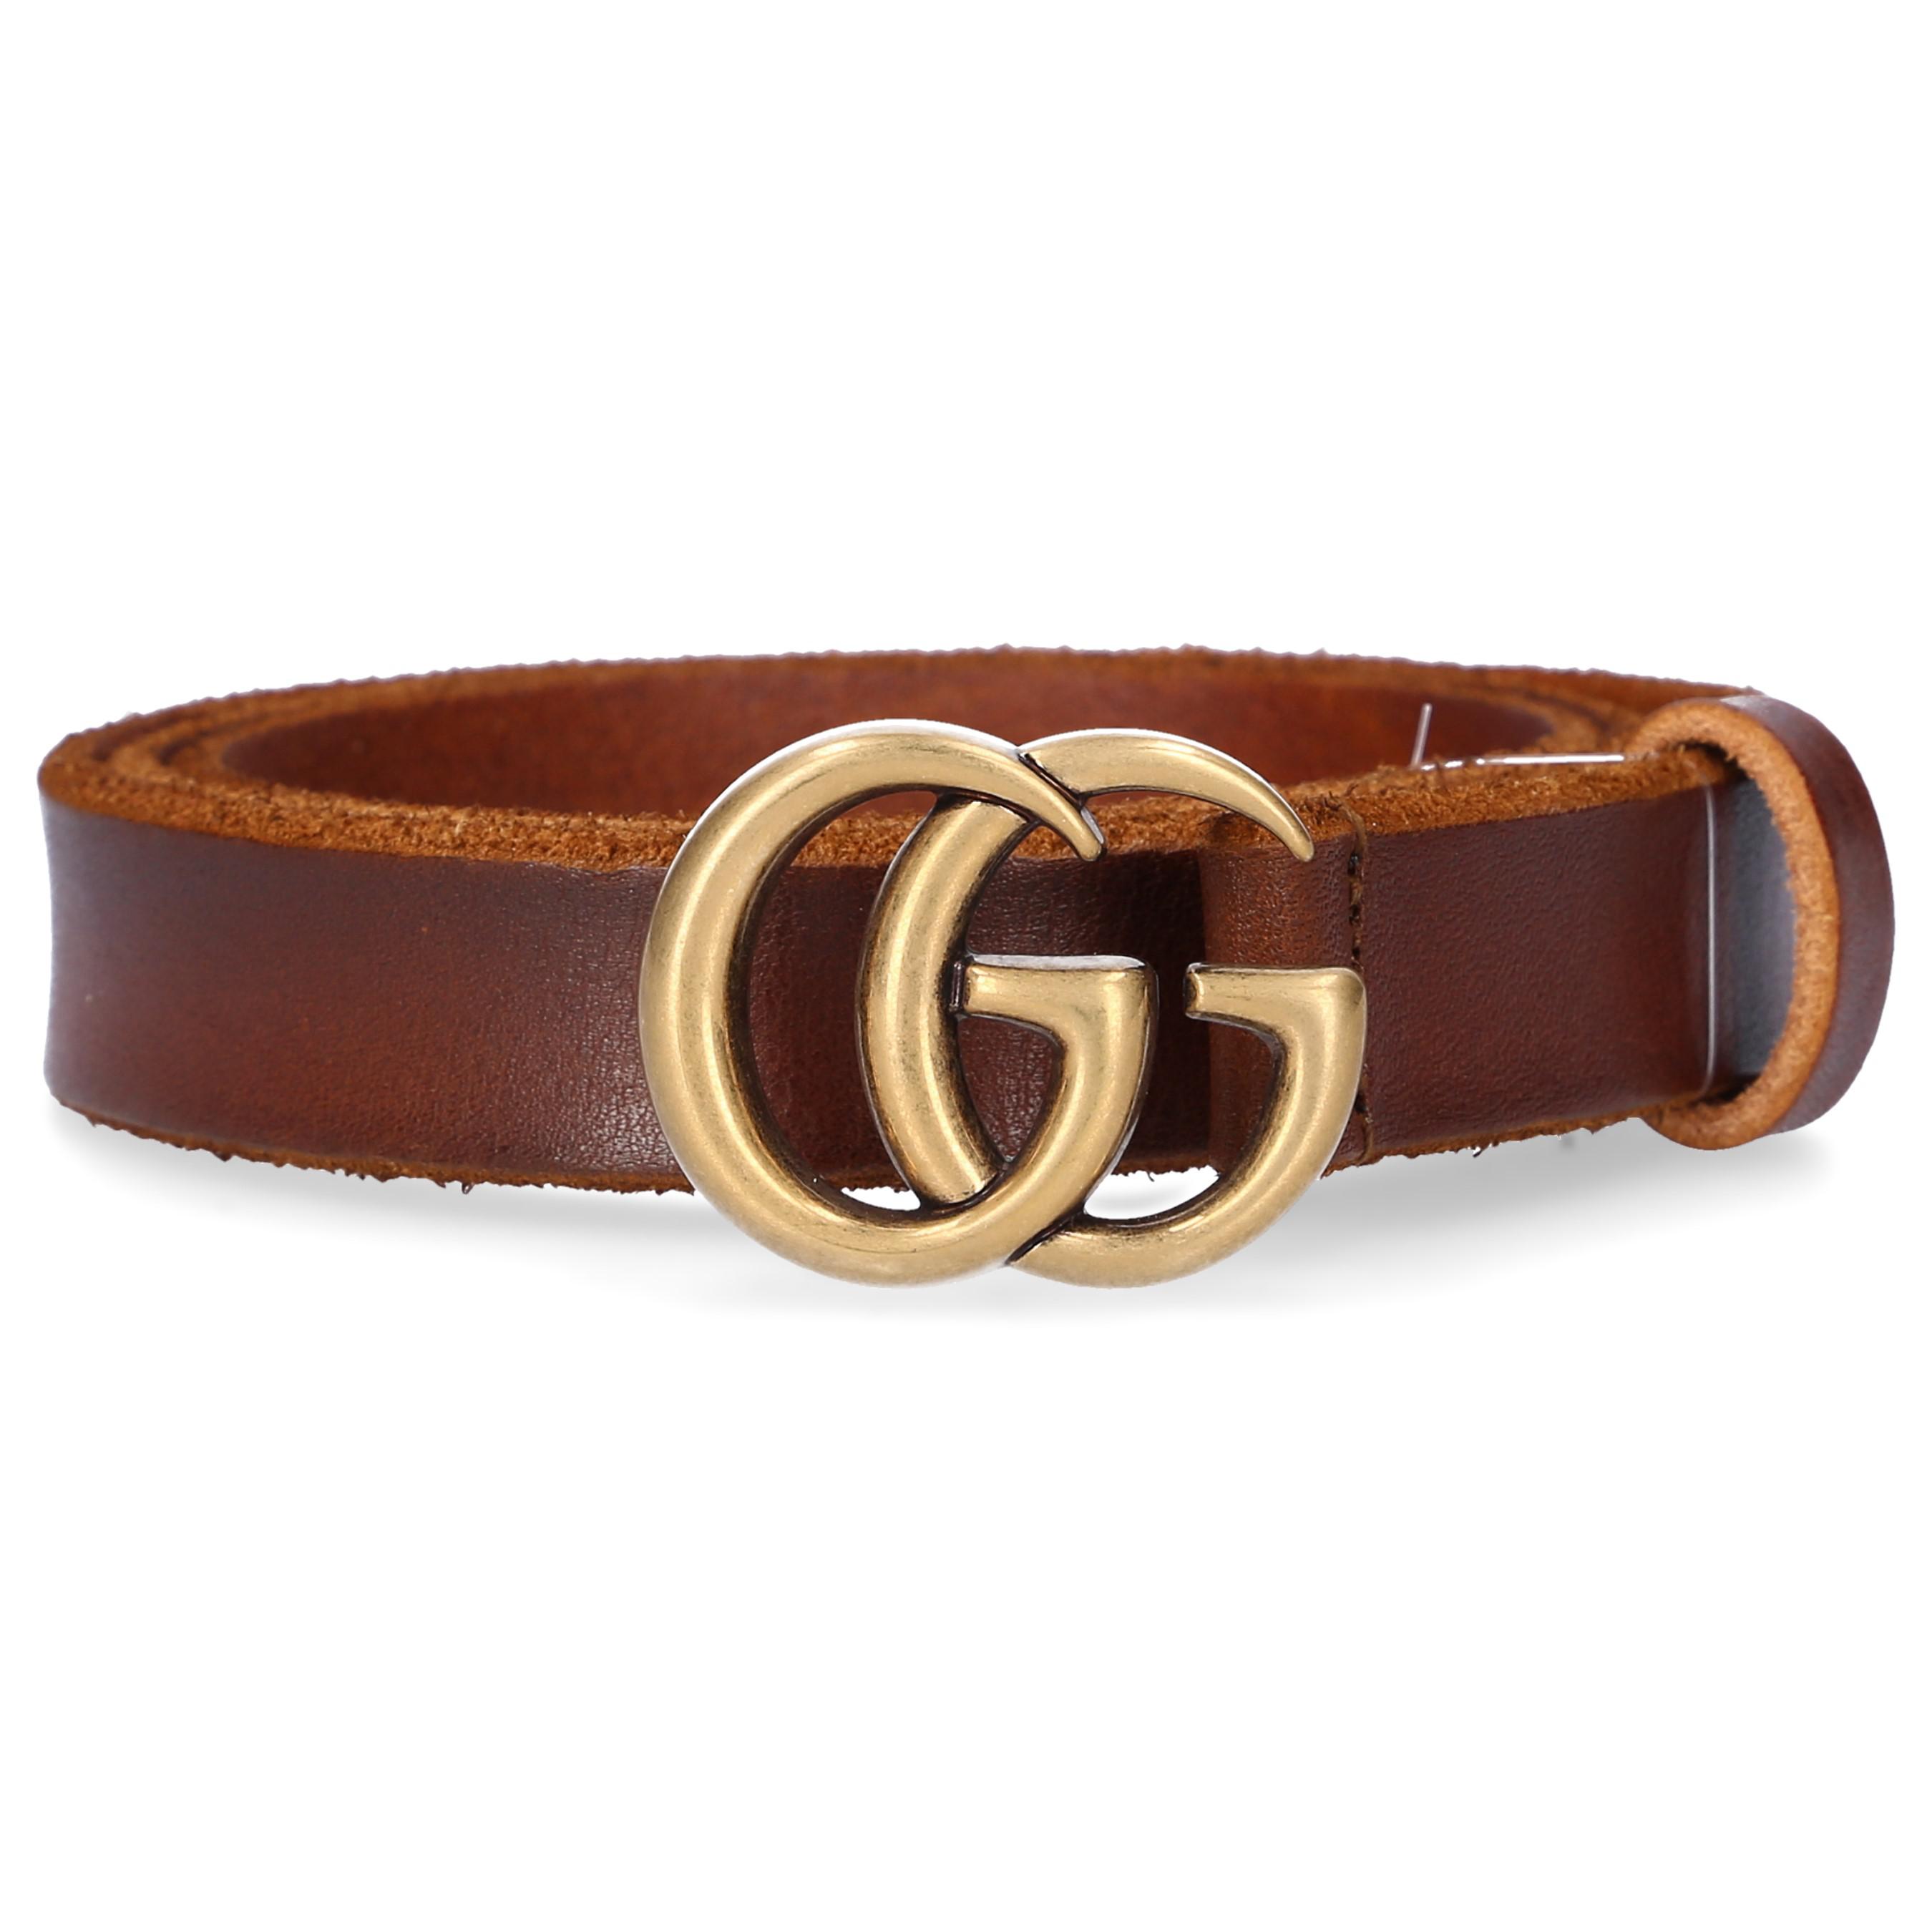 Lyst - Gucci Women Belt GG Logo Leather Used Brown in Brown